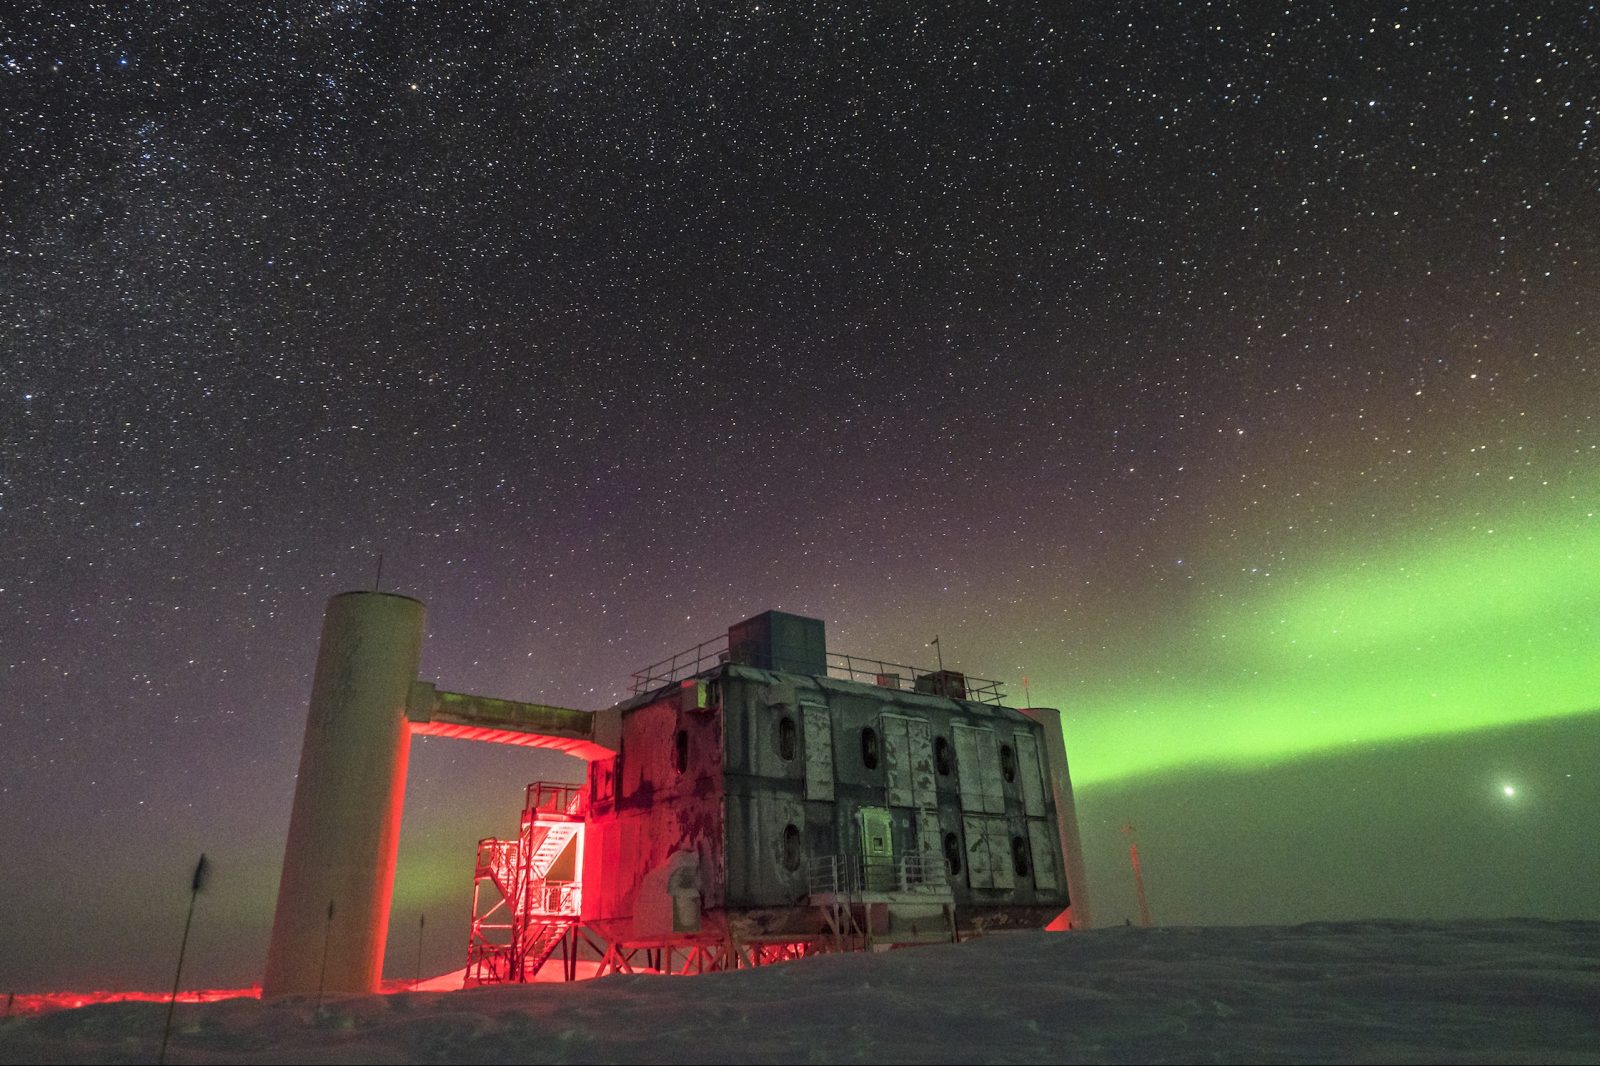 IceCube lab at the South Pole